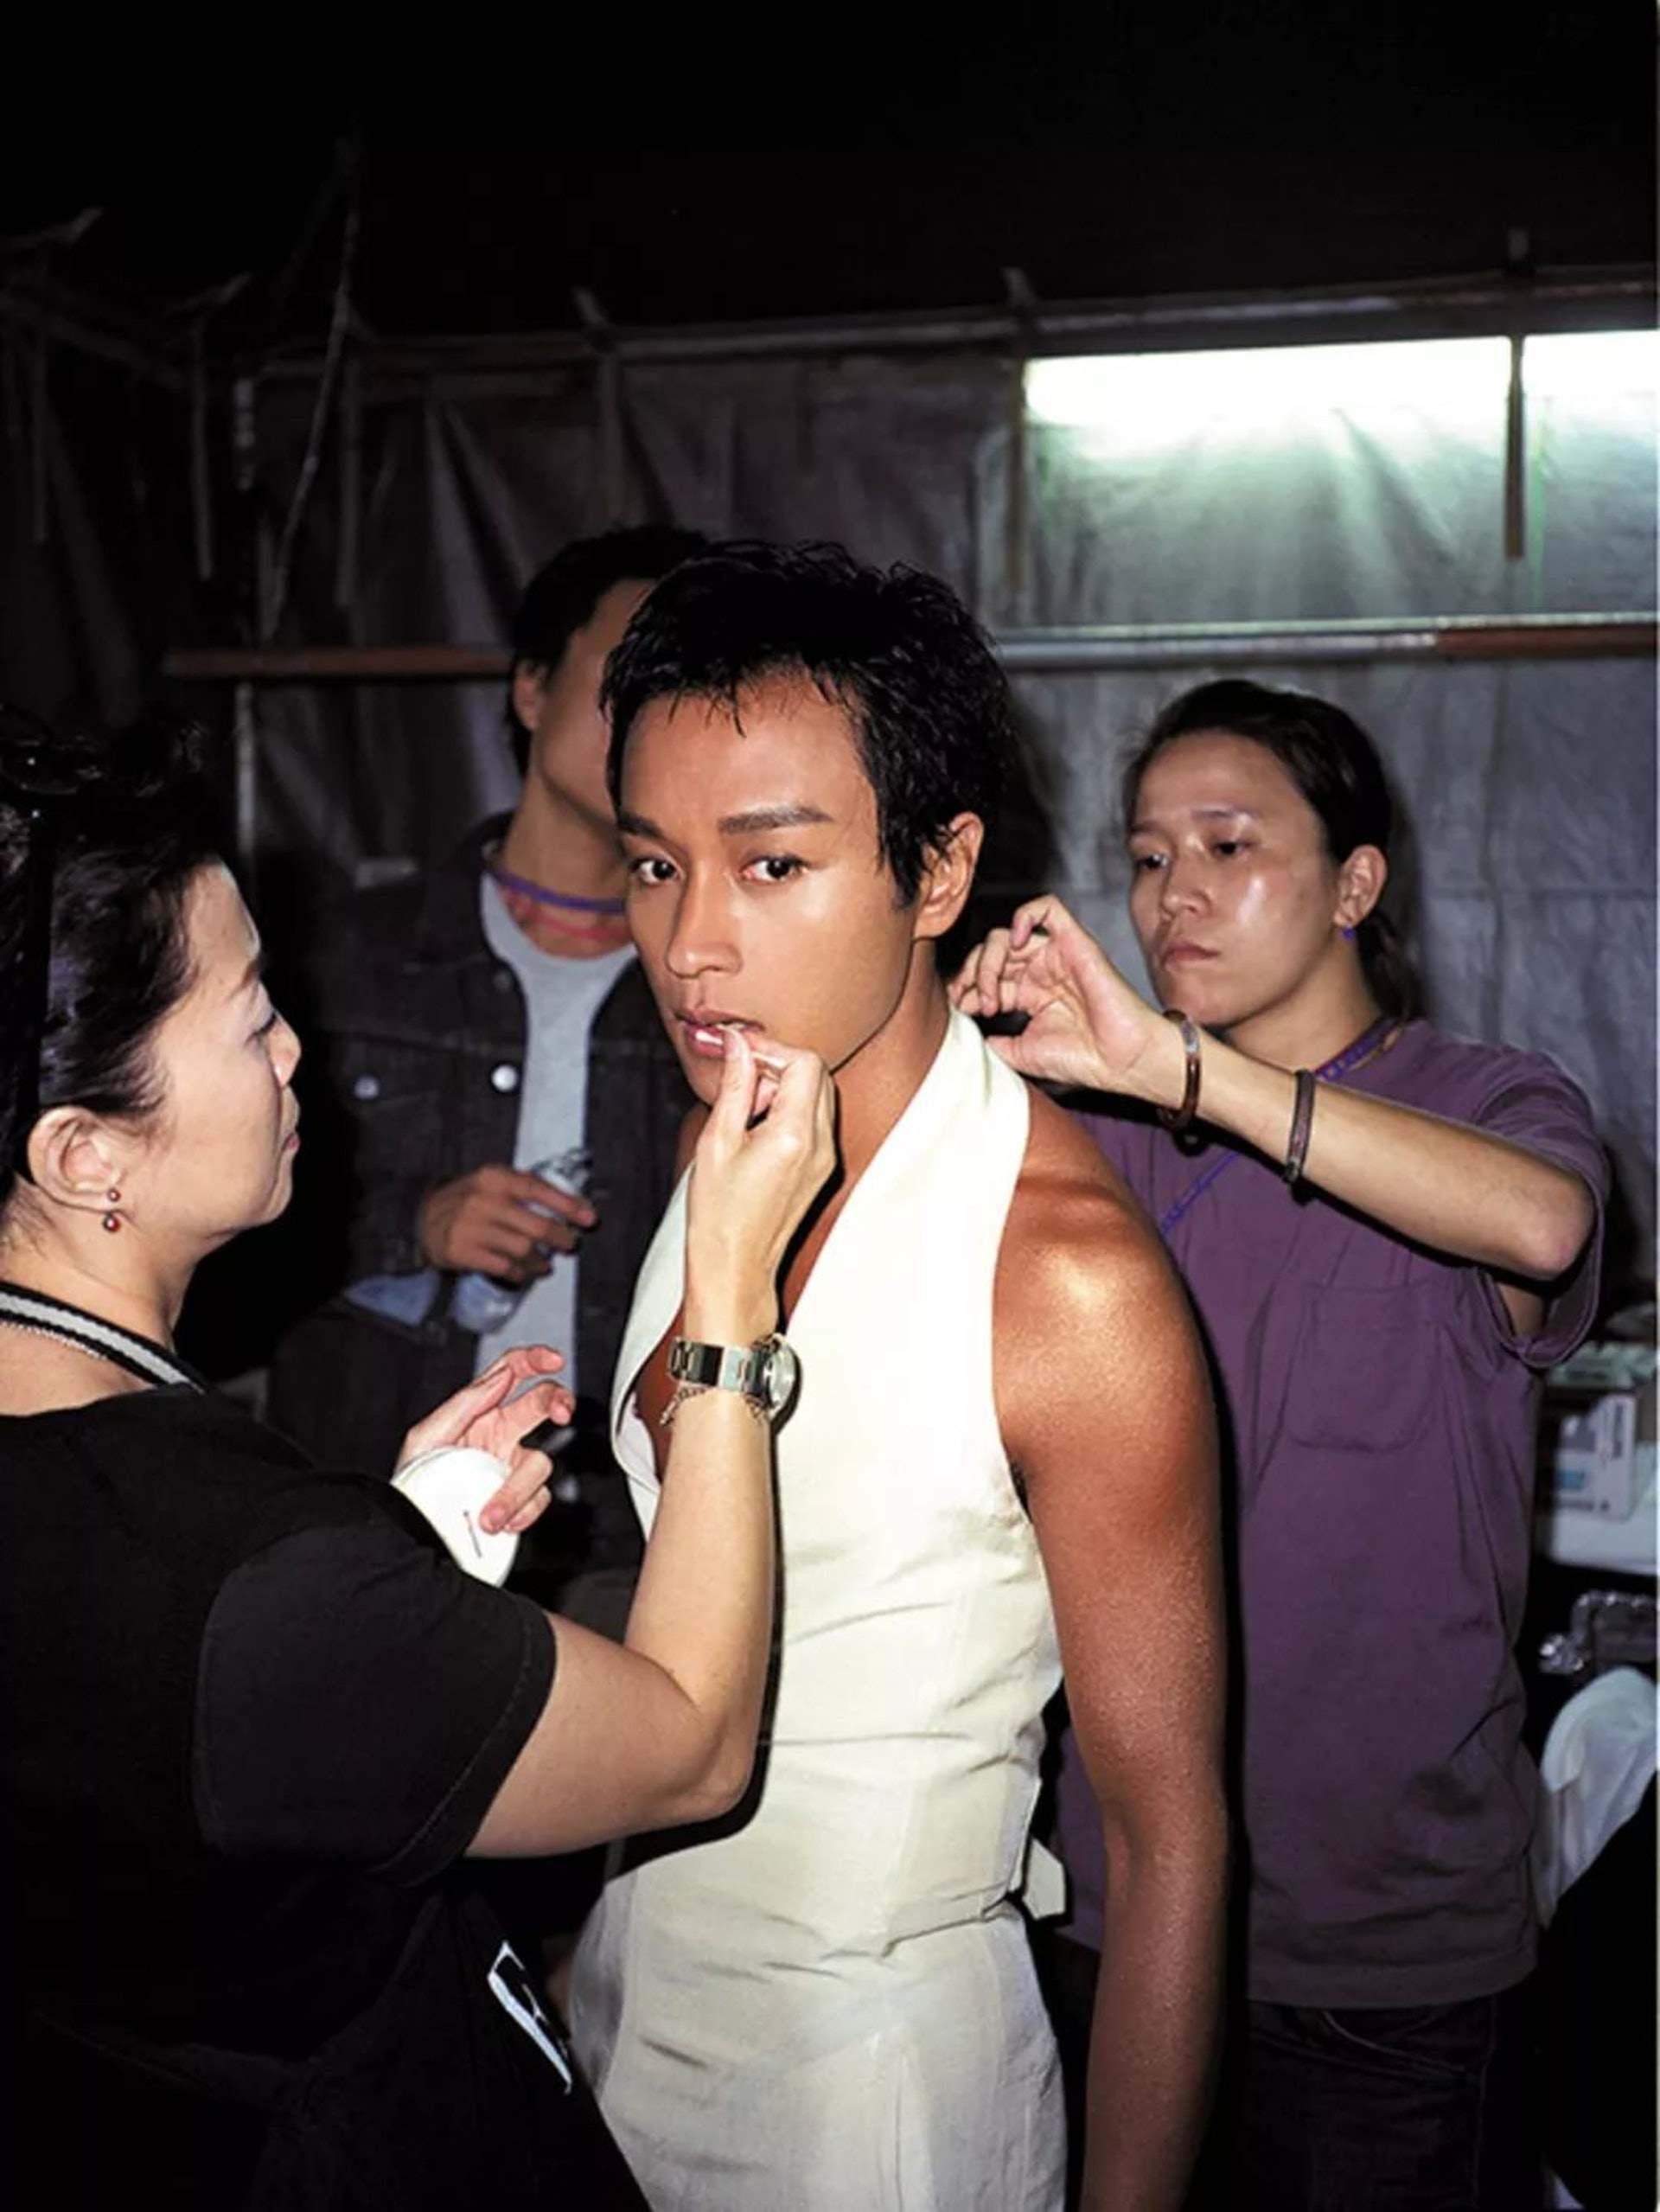 Hong Kong superstar Leslie Cheung’s unique image was the work of a creative team. Photo: Wing Shya